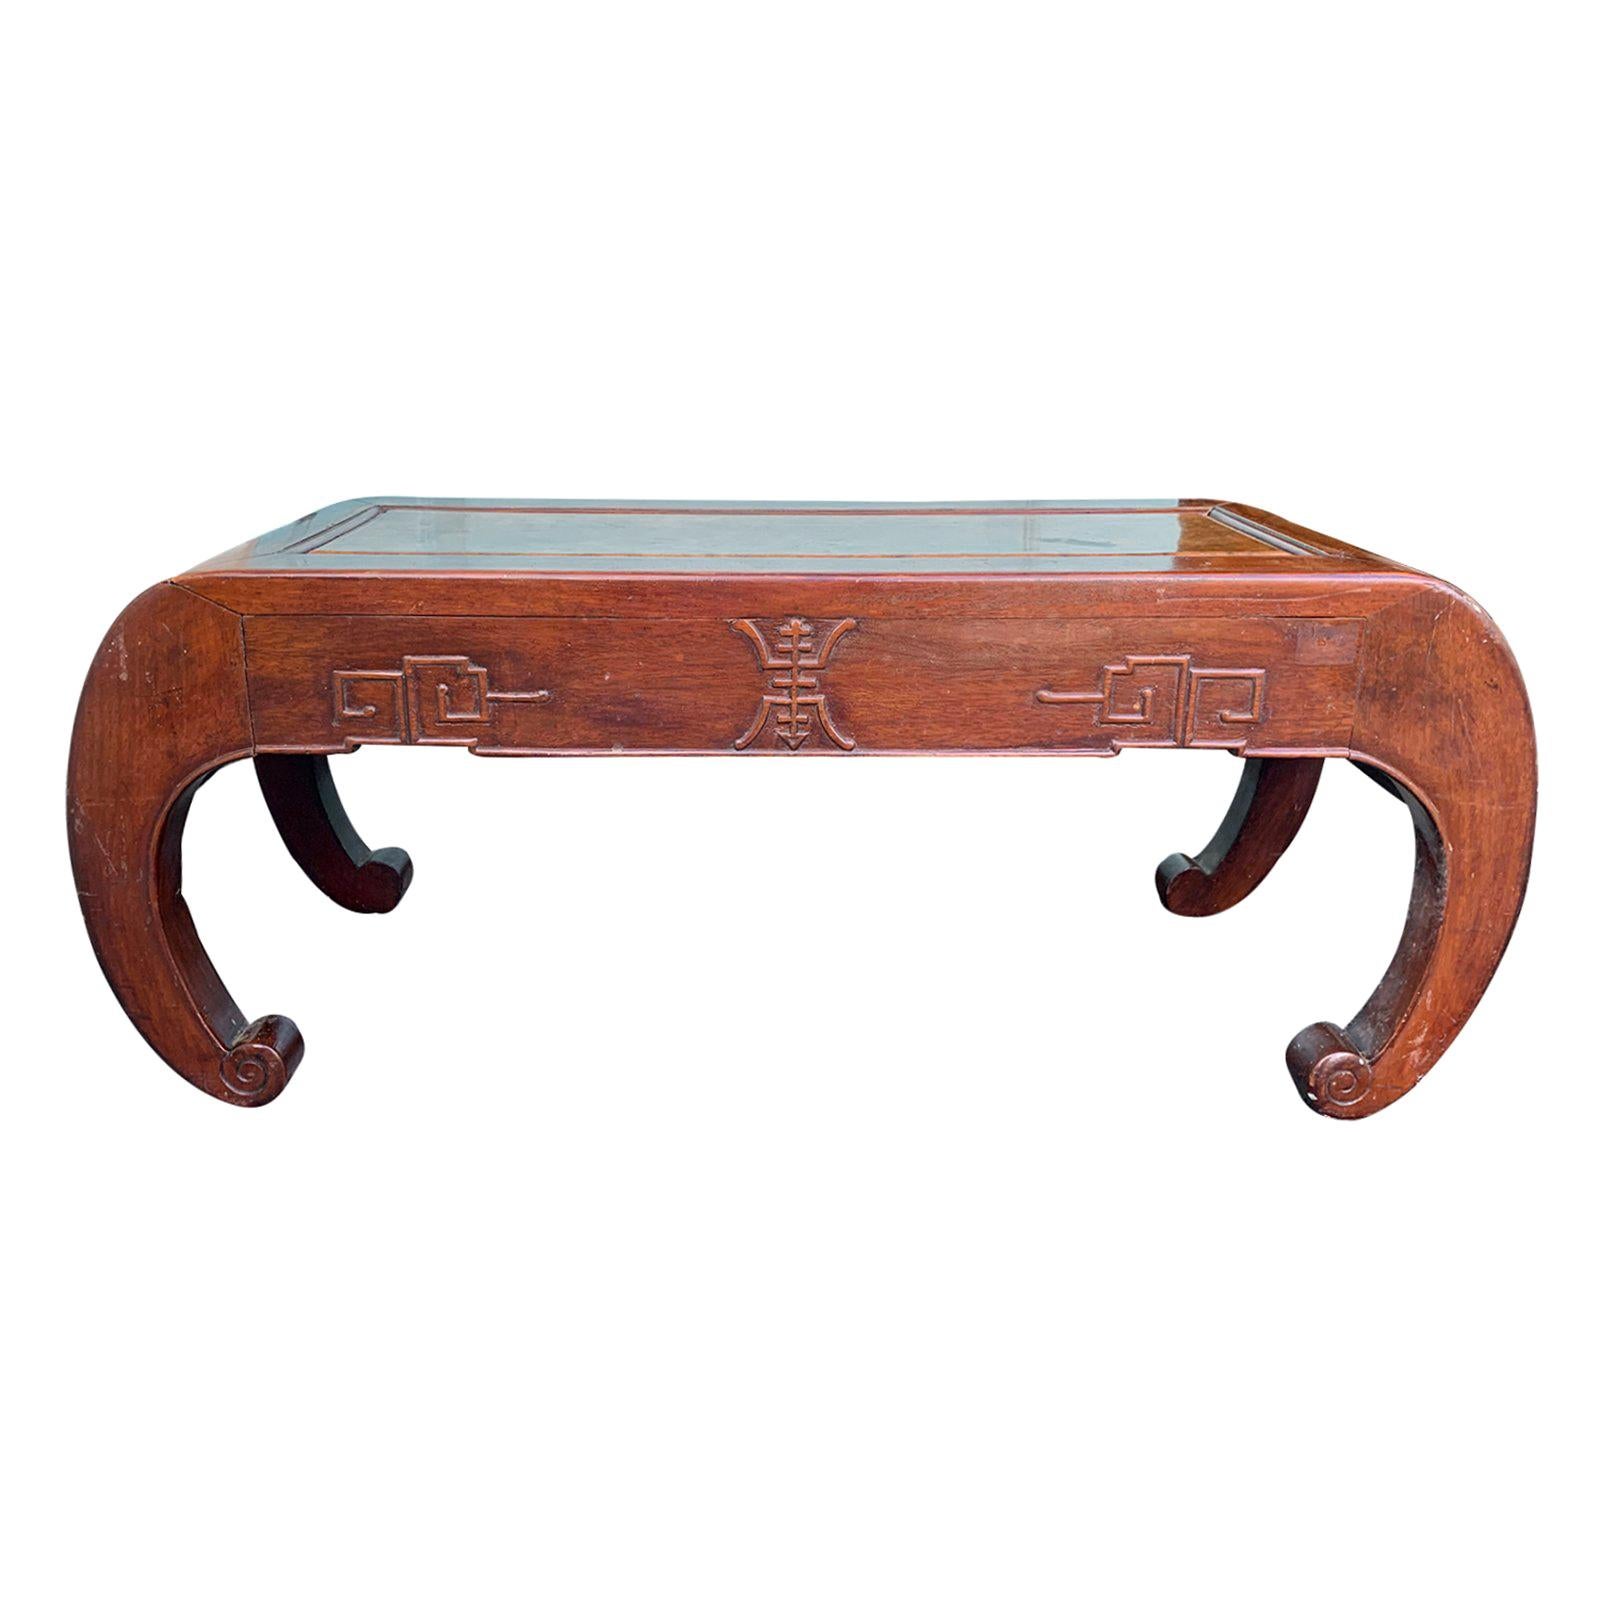 19th Century Chinese Low Coffee Table